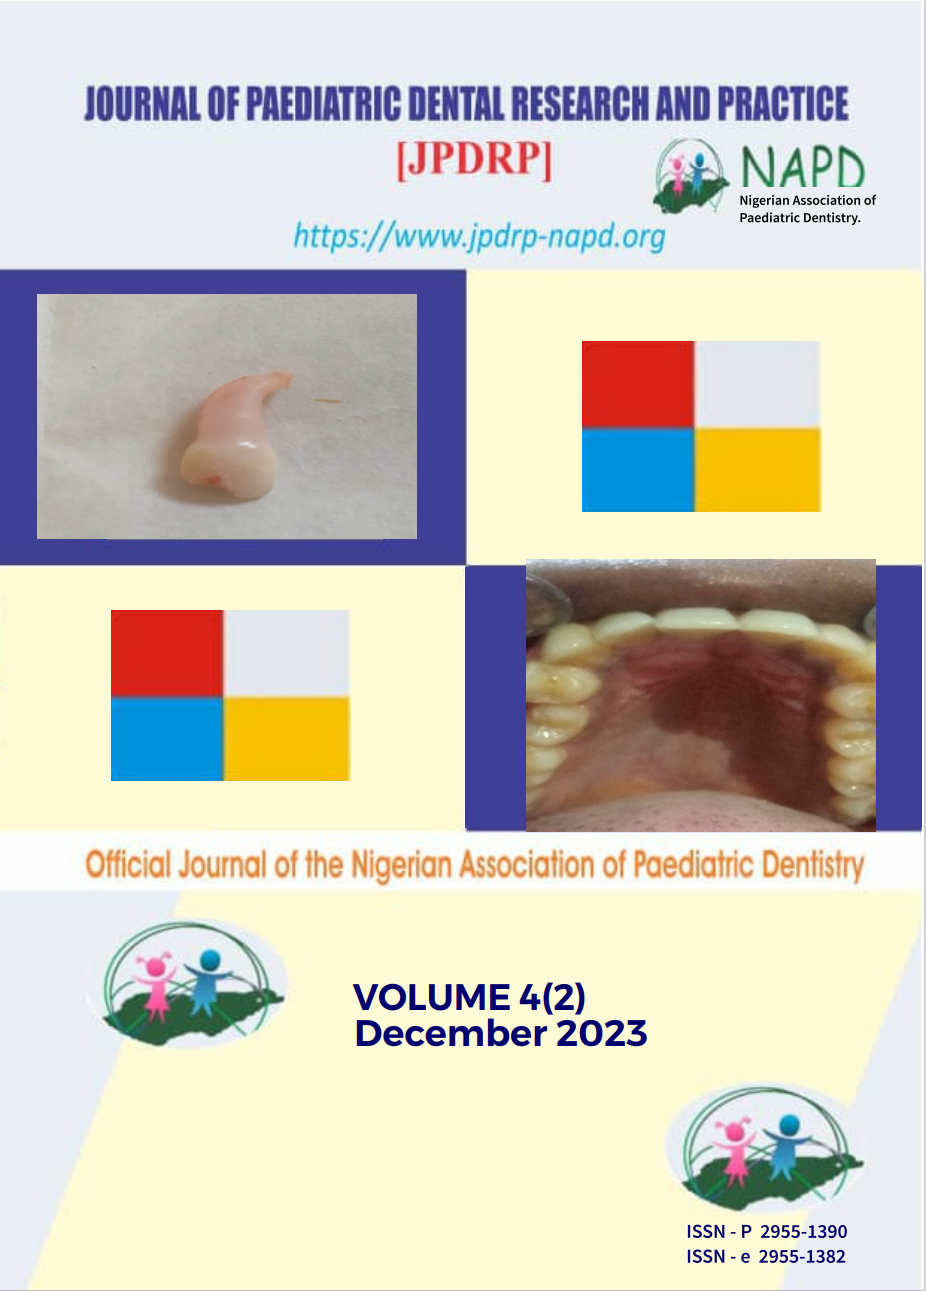 Journal of Paediatric Dental Research and Practice